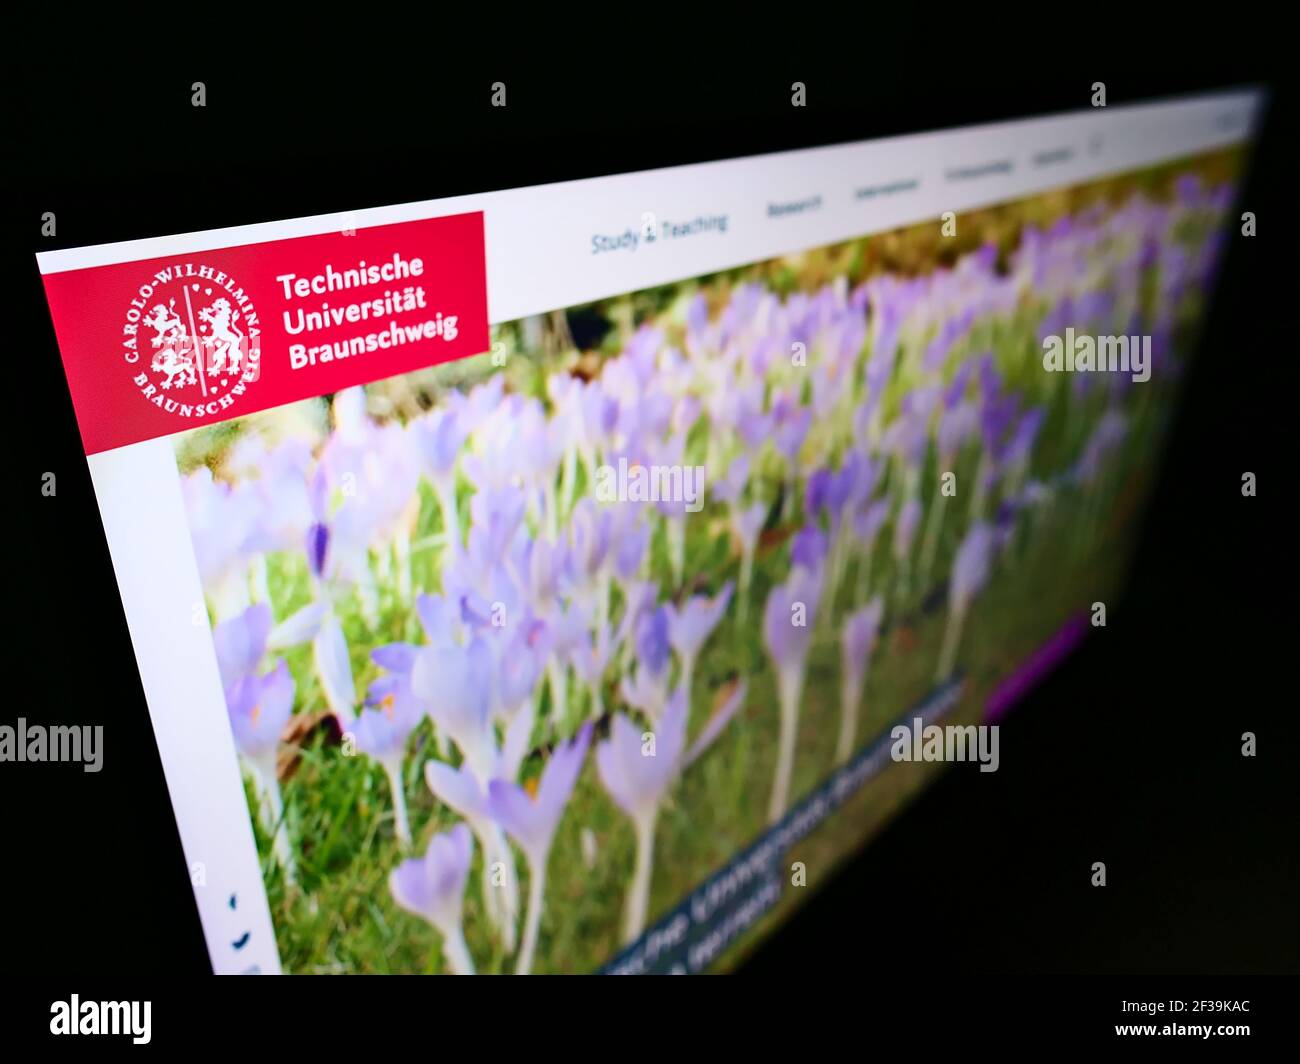 High angle view of website with logo of German education institution Technical University of Braunschweig on monitor. Focus on top-left of screen. Stock Photo